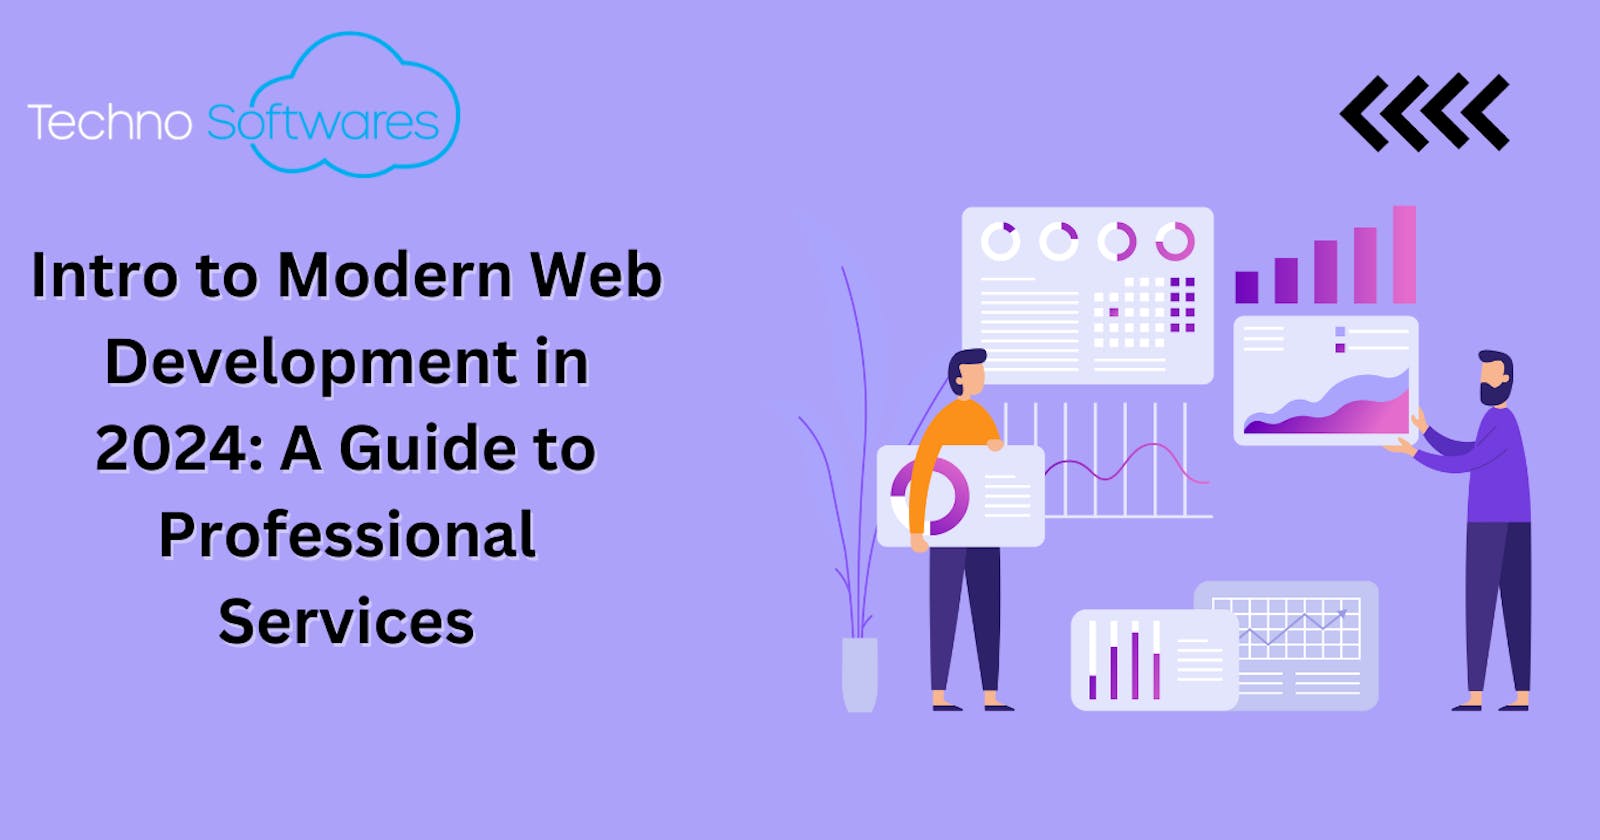 Intro to Modern Web Development in 2024: A Guide to Professional Services